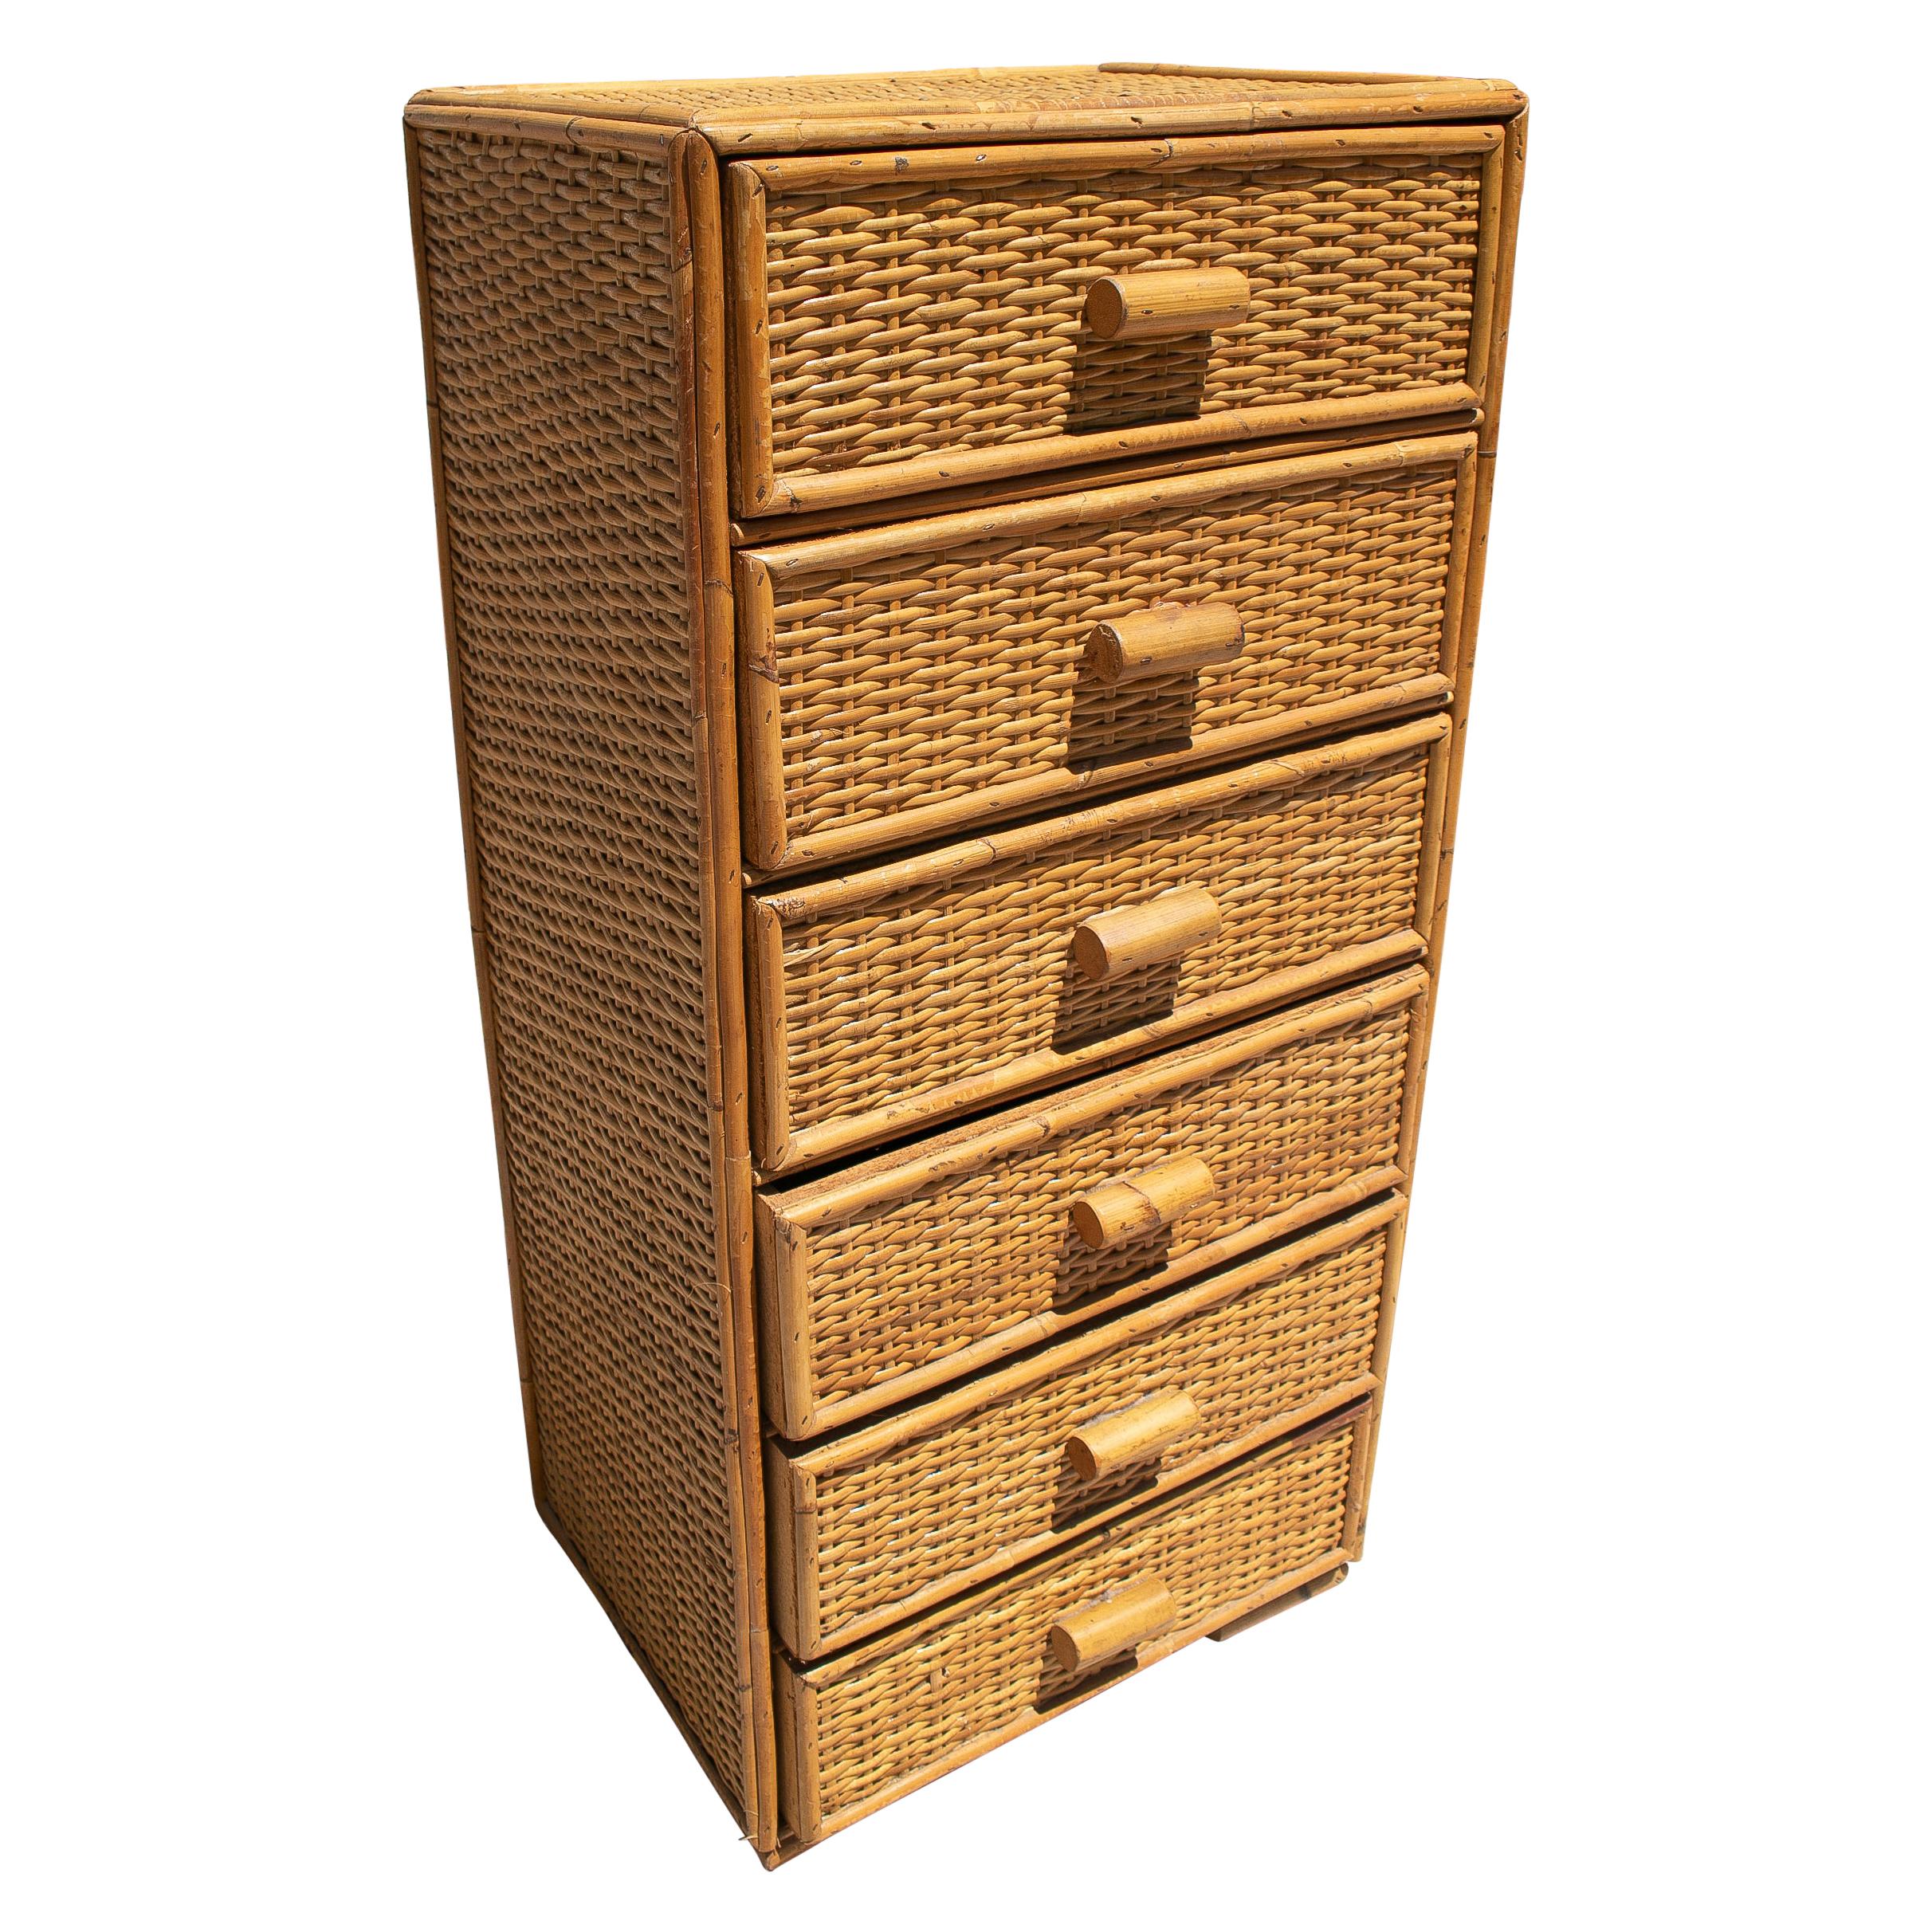 1970s Spanish Lace Wicker 6-Drawer Tall Chest For Sale